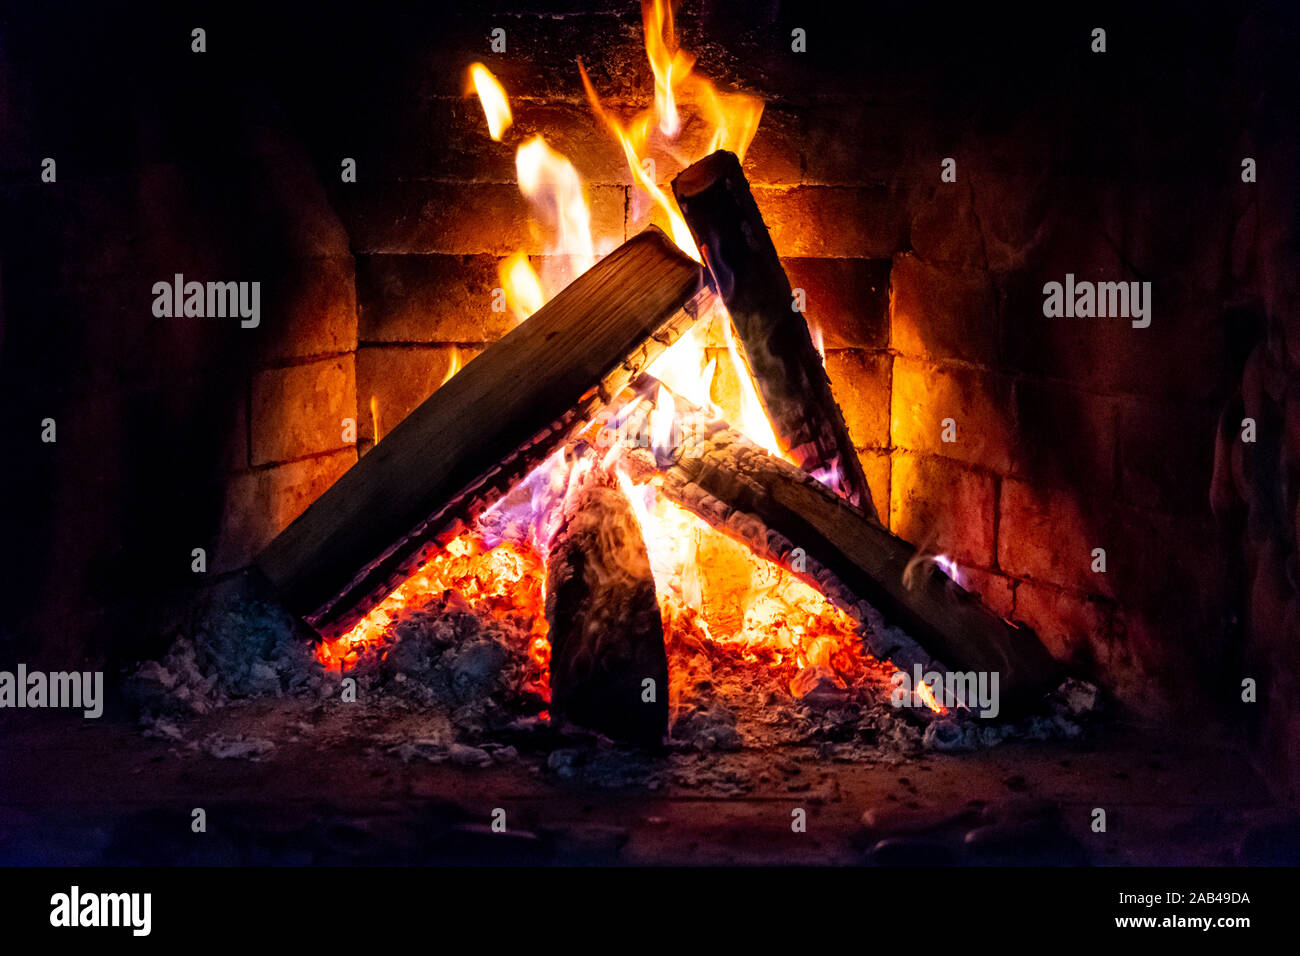 Flames in the fireplace. Burning wood. Brick fireplace Stock Photo